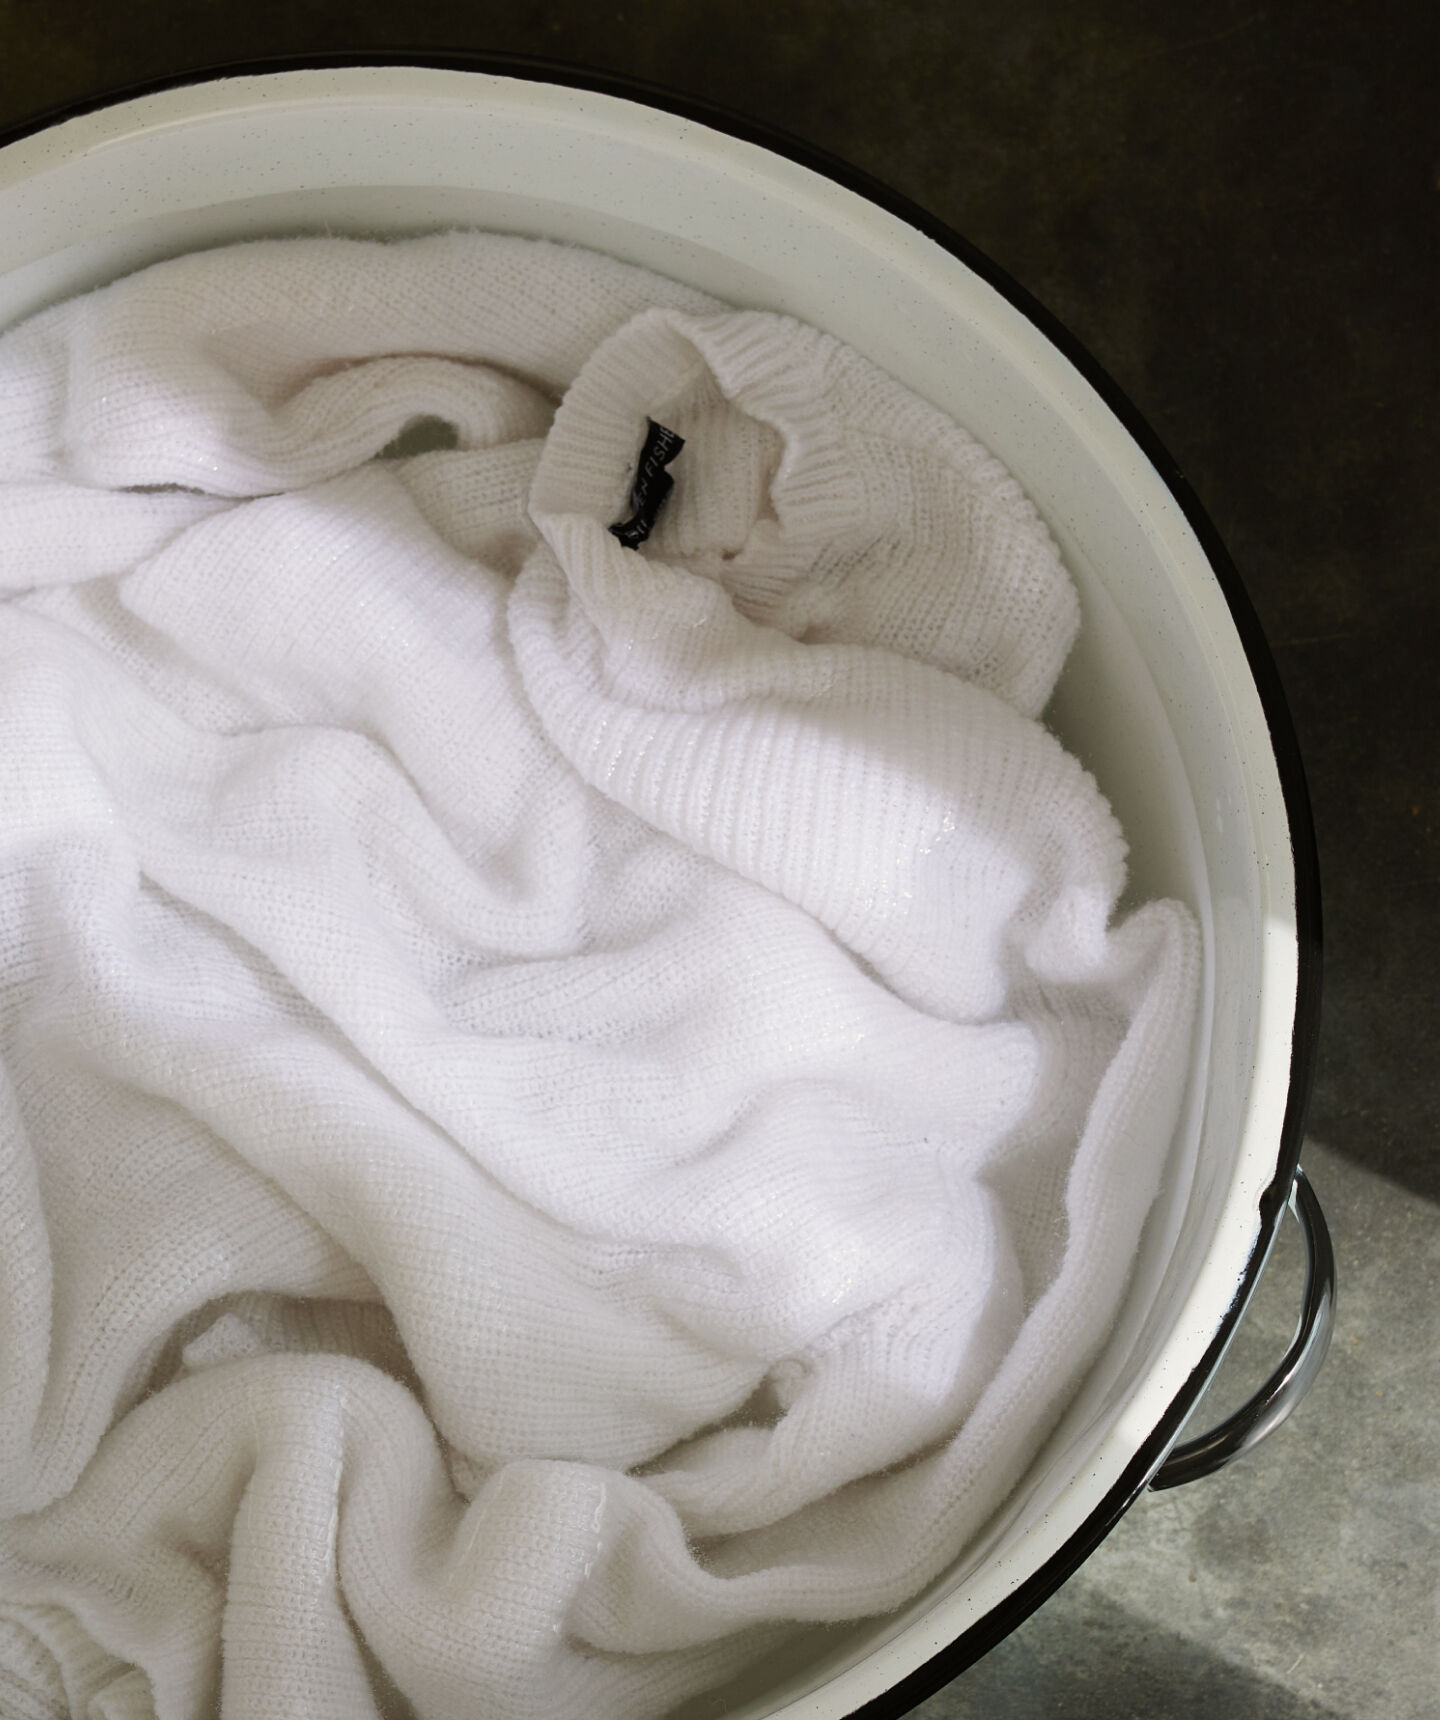 Beige sweater in basin of soapy water.